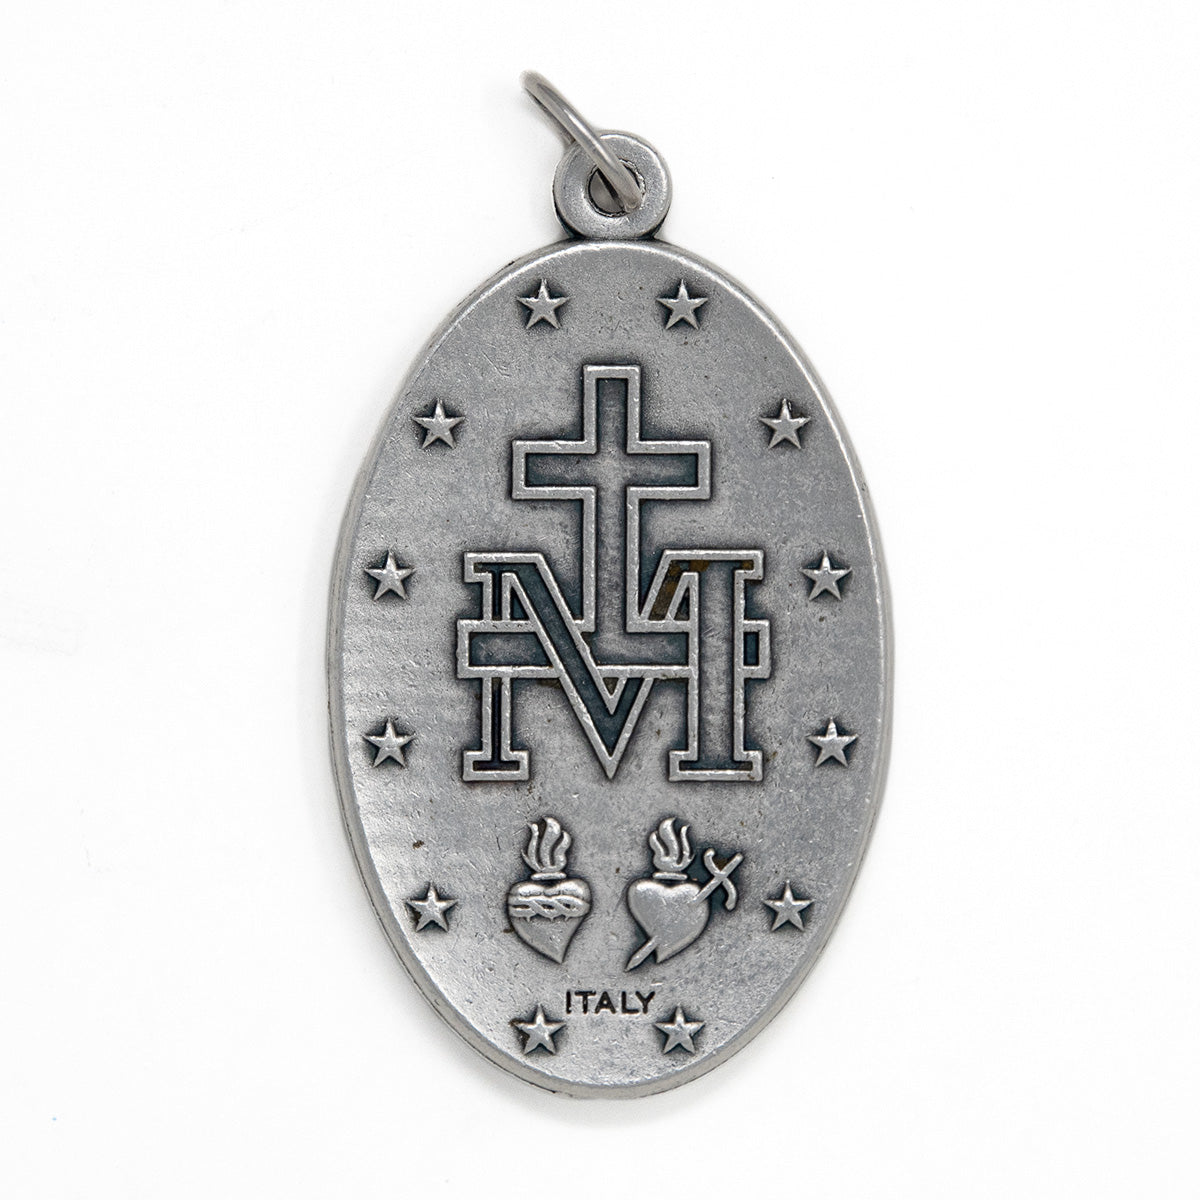 Large Miraculous Medal in English